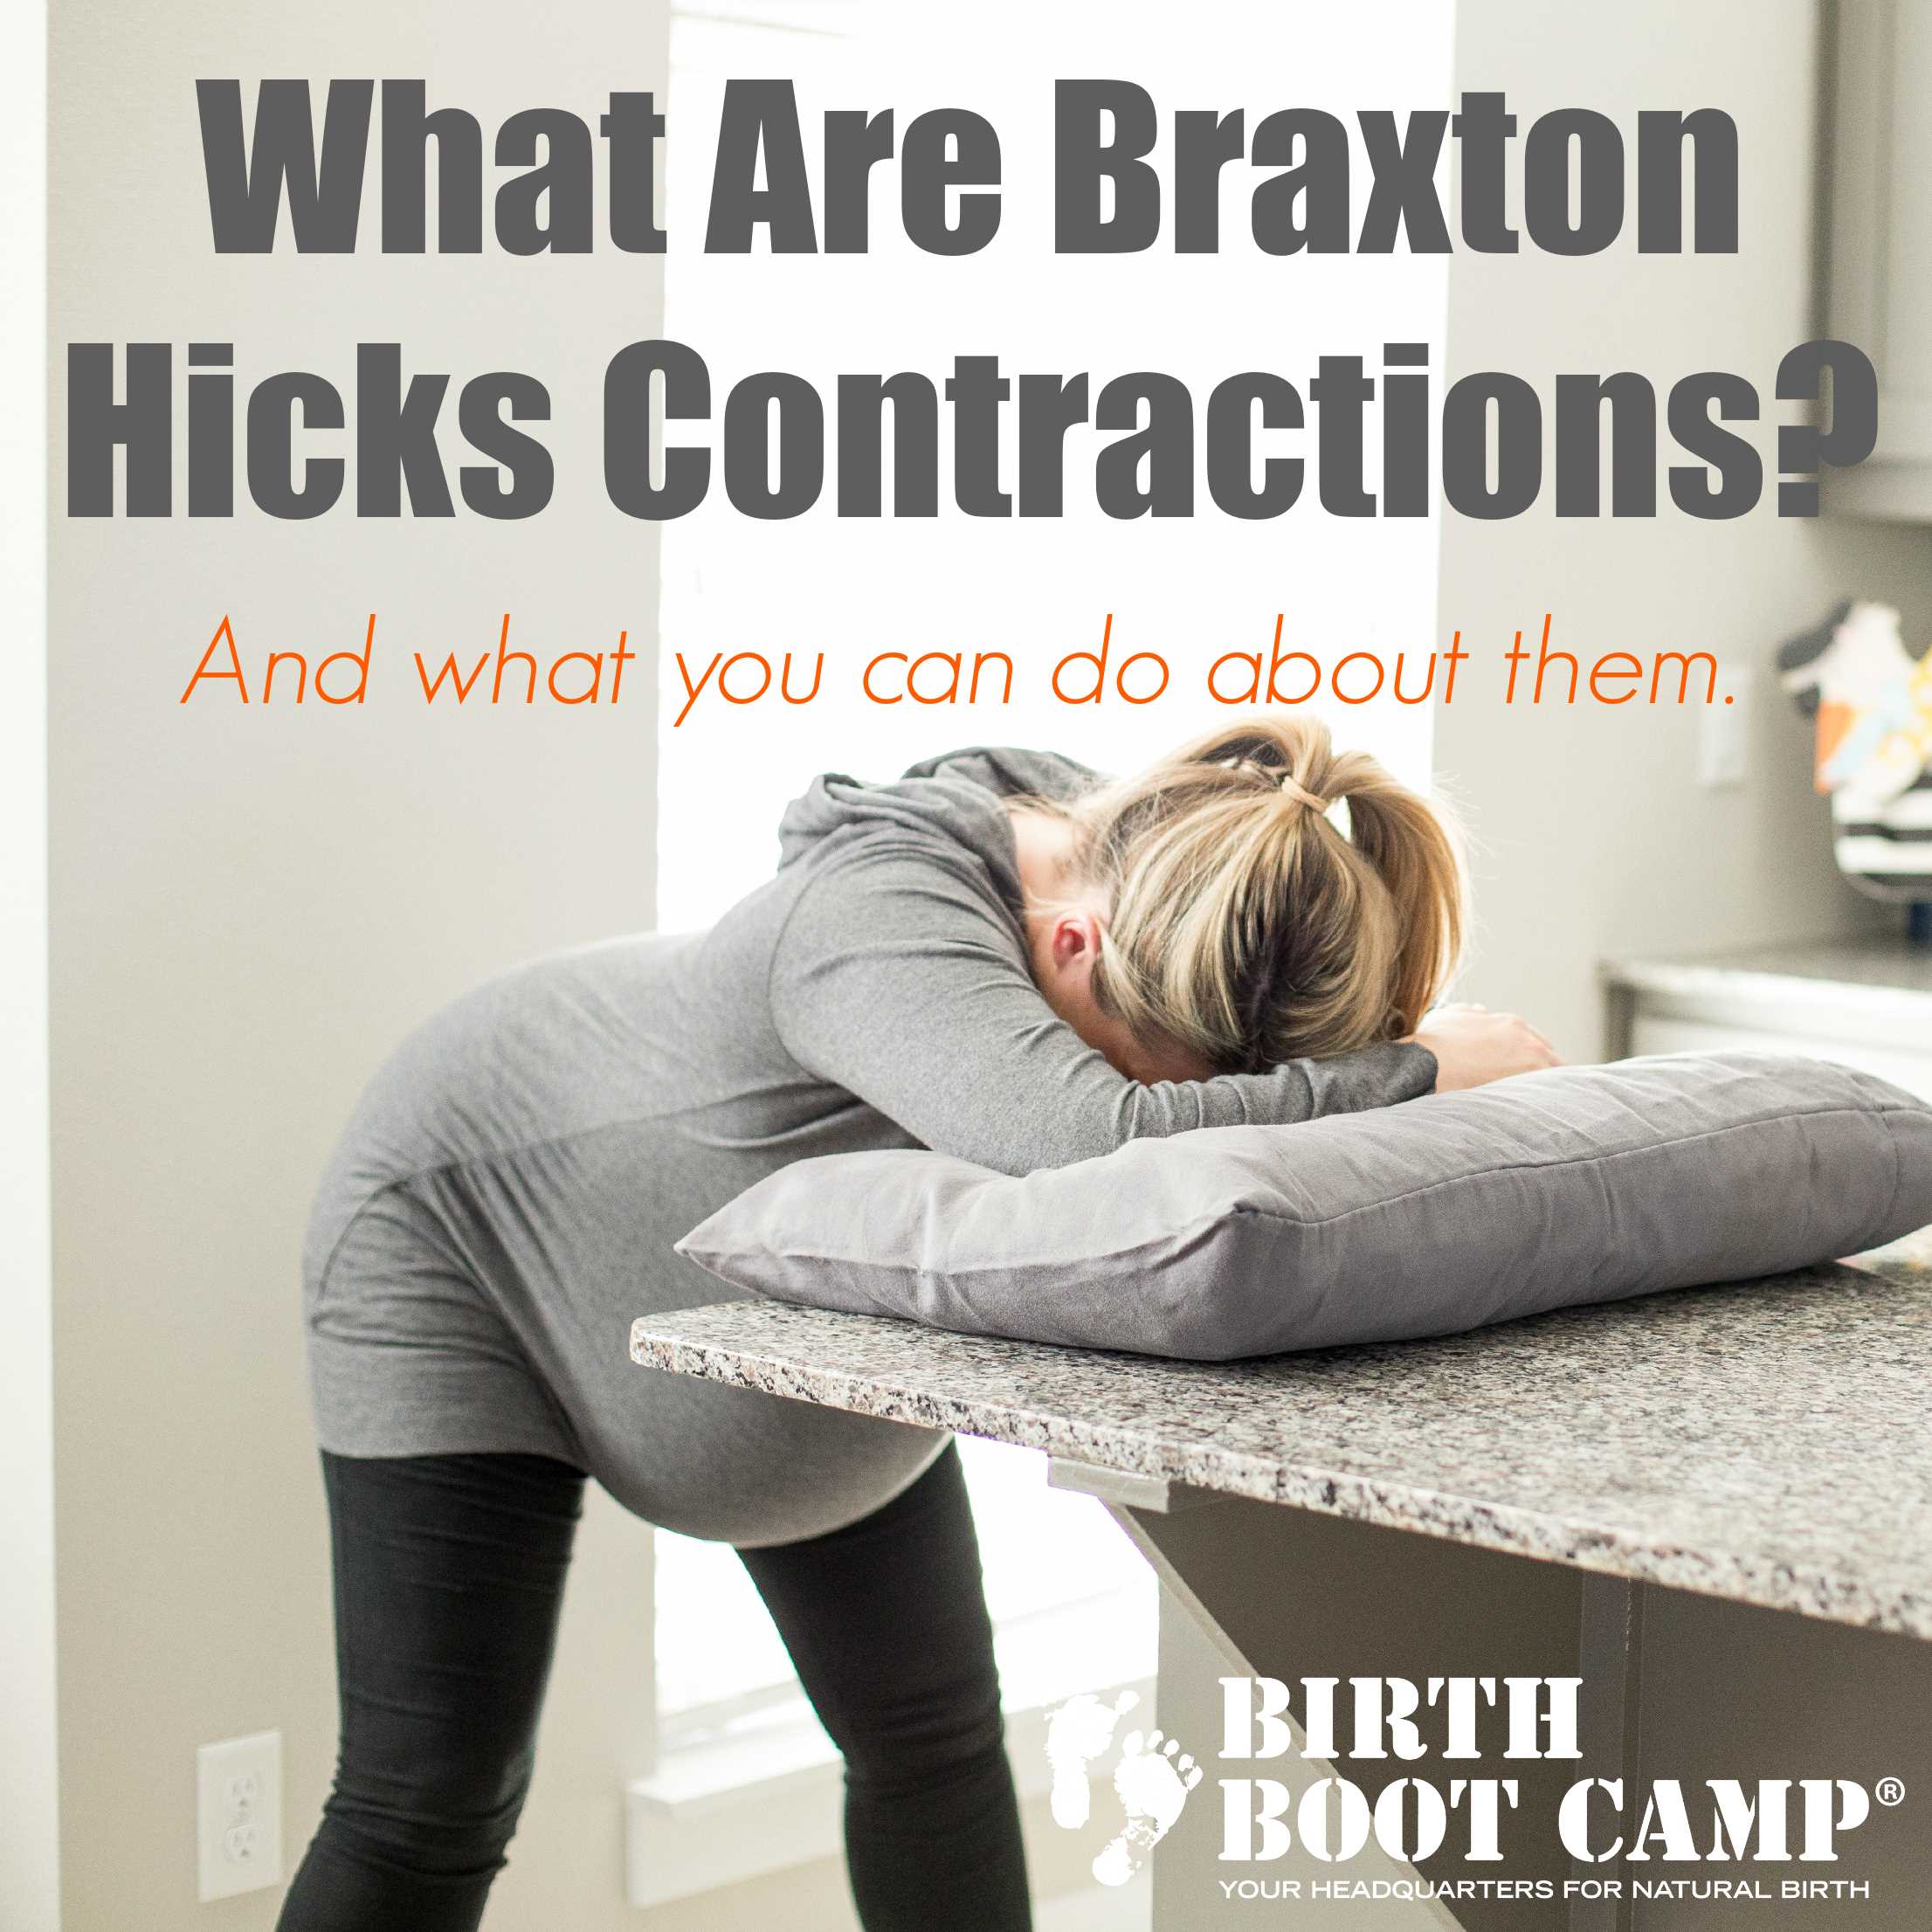 What Are Braxton Hicks Contractions? - Birth Boot Camp ...